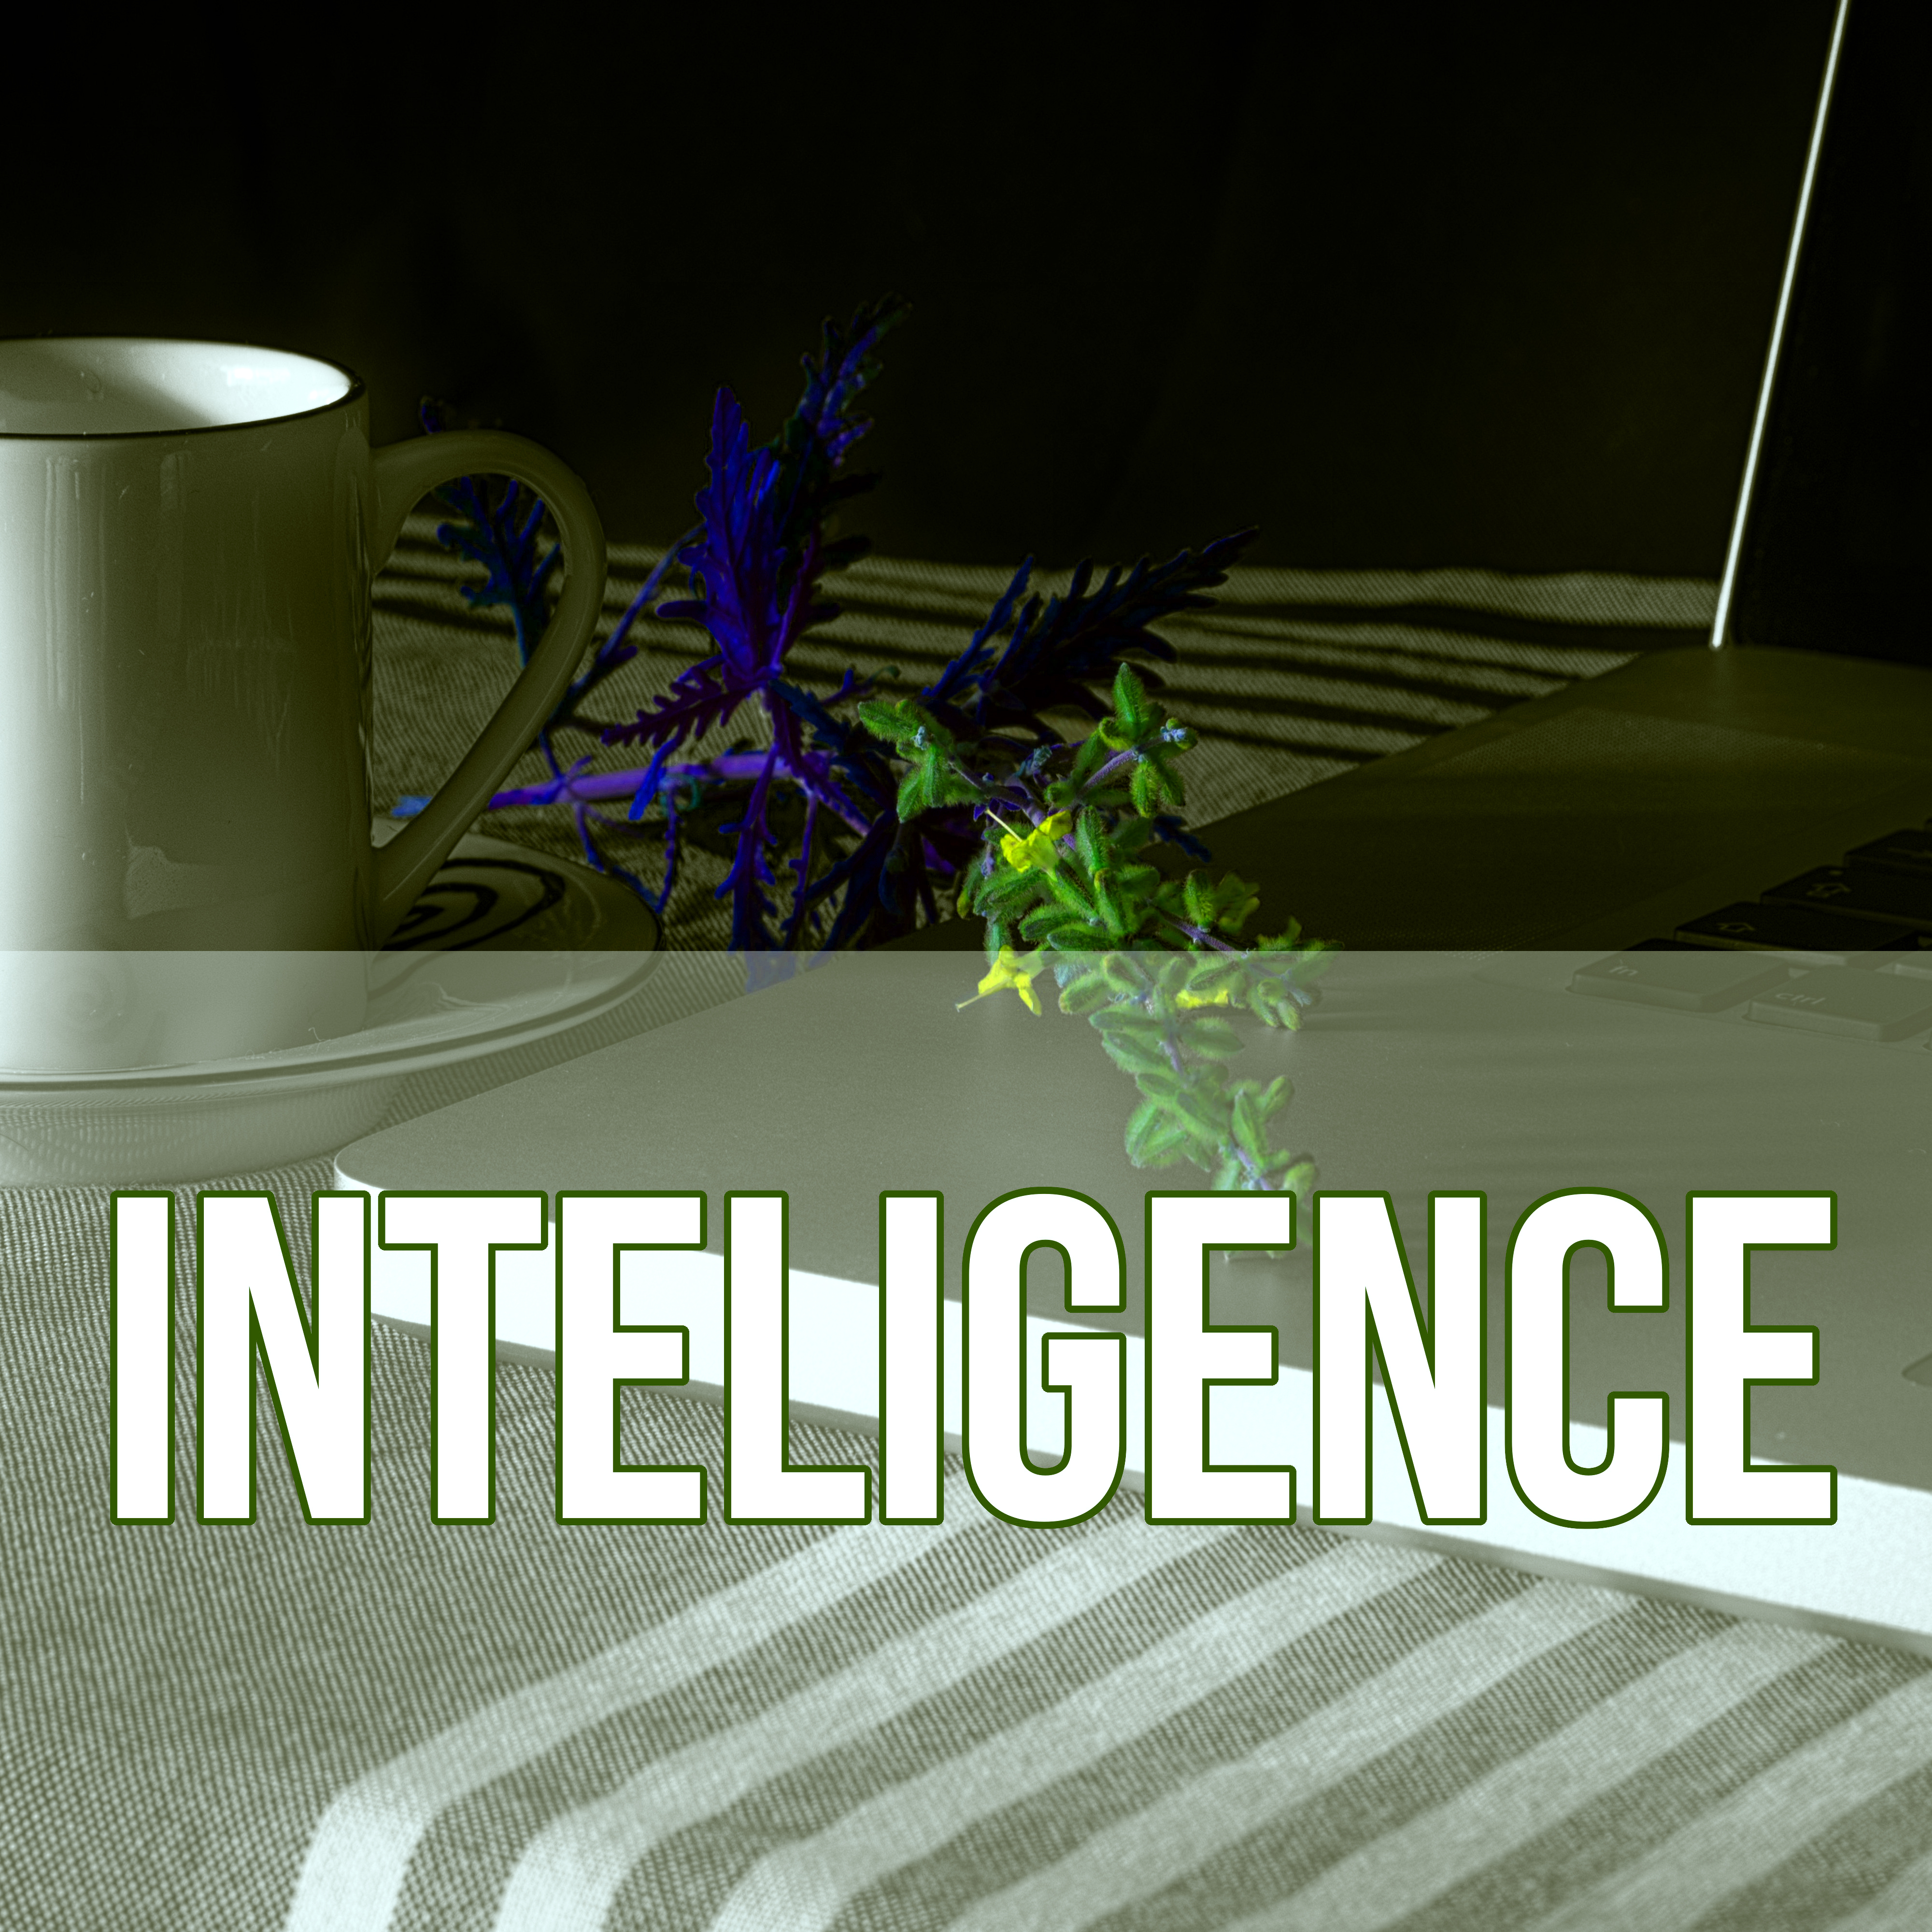 Inteligence - Music for Studying, Piano Sounds to Increase Brain Power, Instrumental Relaxing Music for Reading